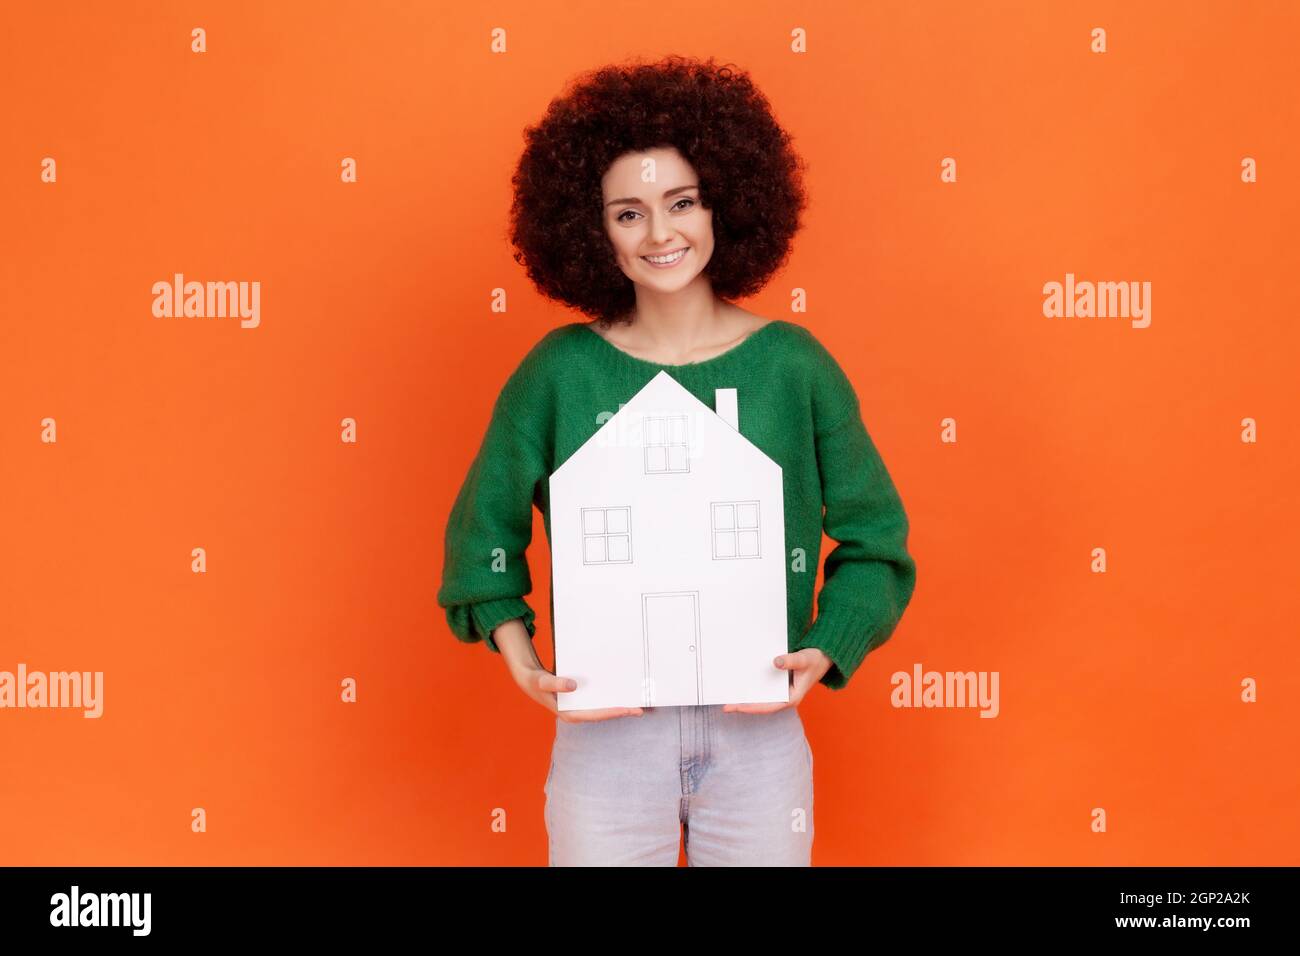 Pleasant looking woman with Afro hairstyle wearing green casual style sweater holding white paper house, buying new apartment, real estate agency. Indoor studio shot isolated on orange background. Stock Photo